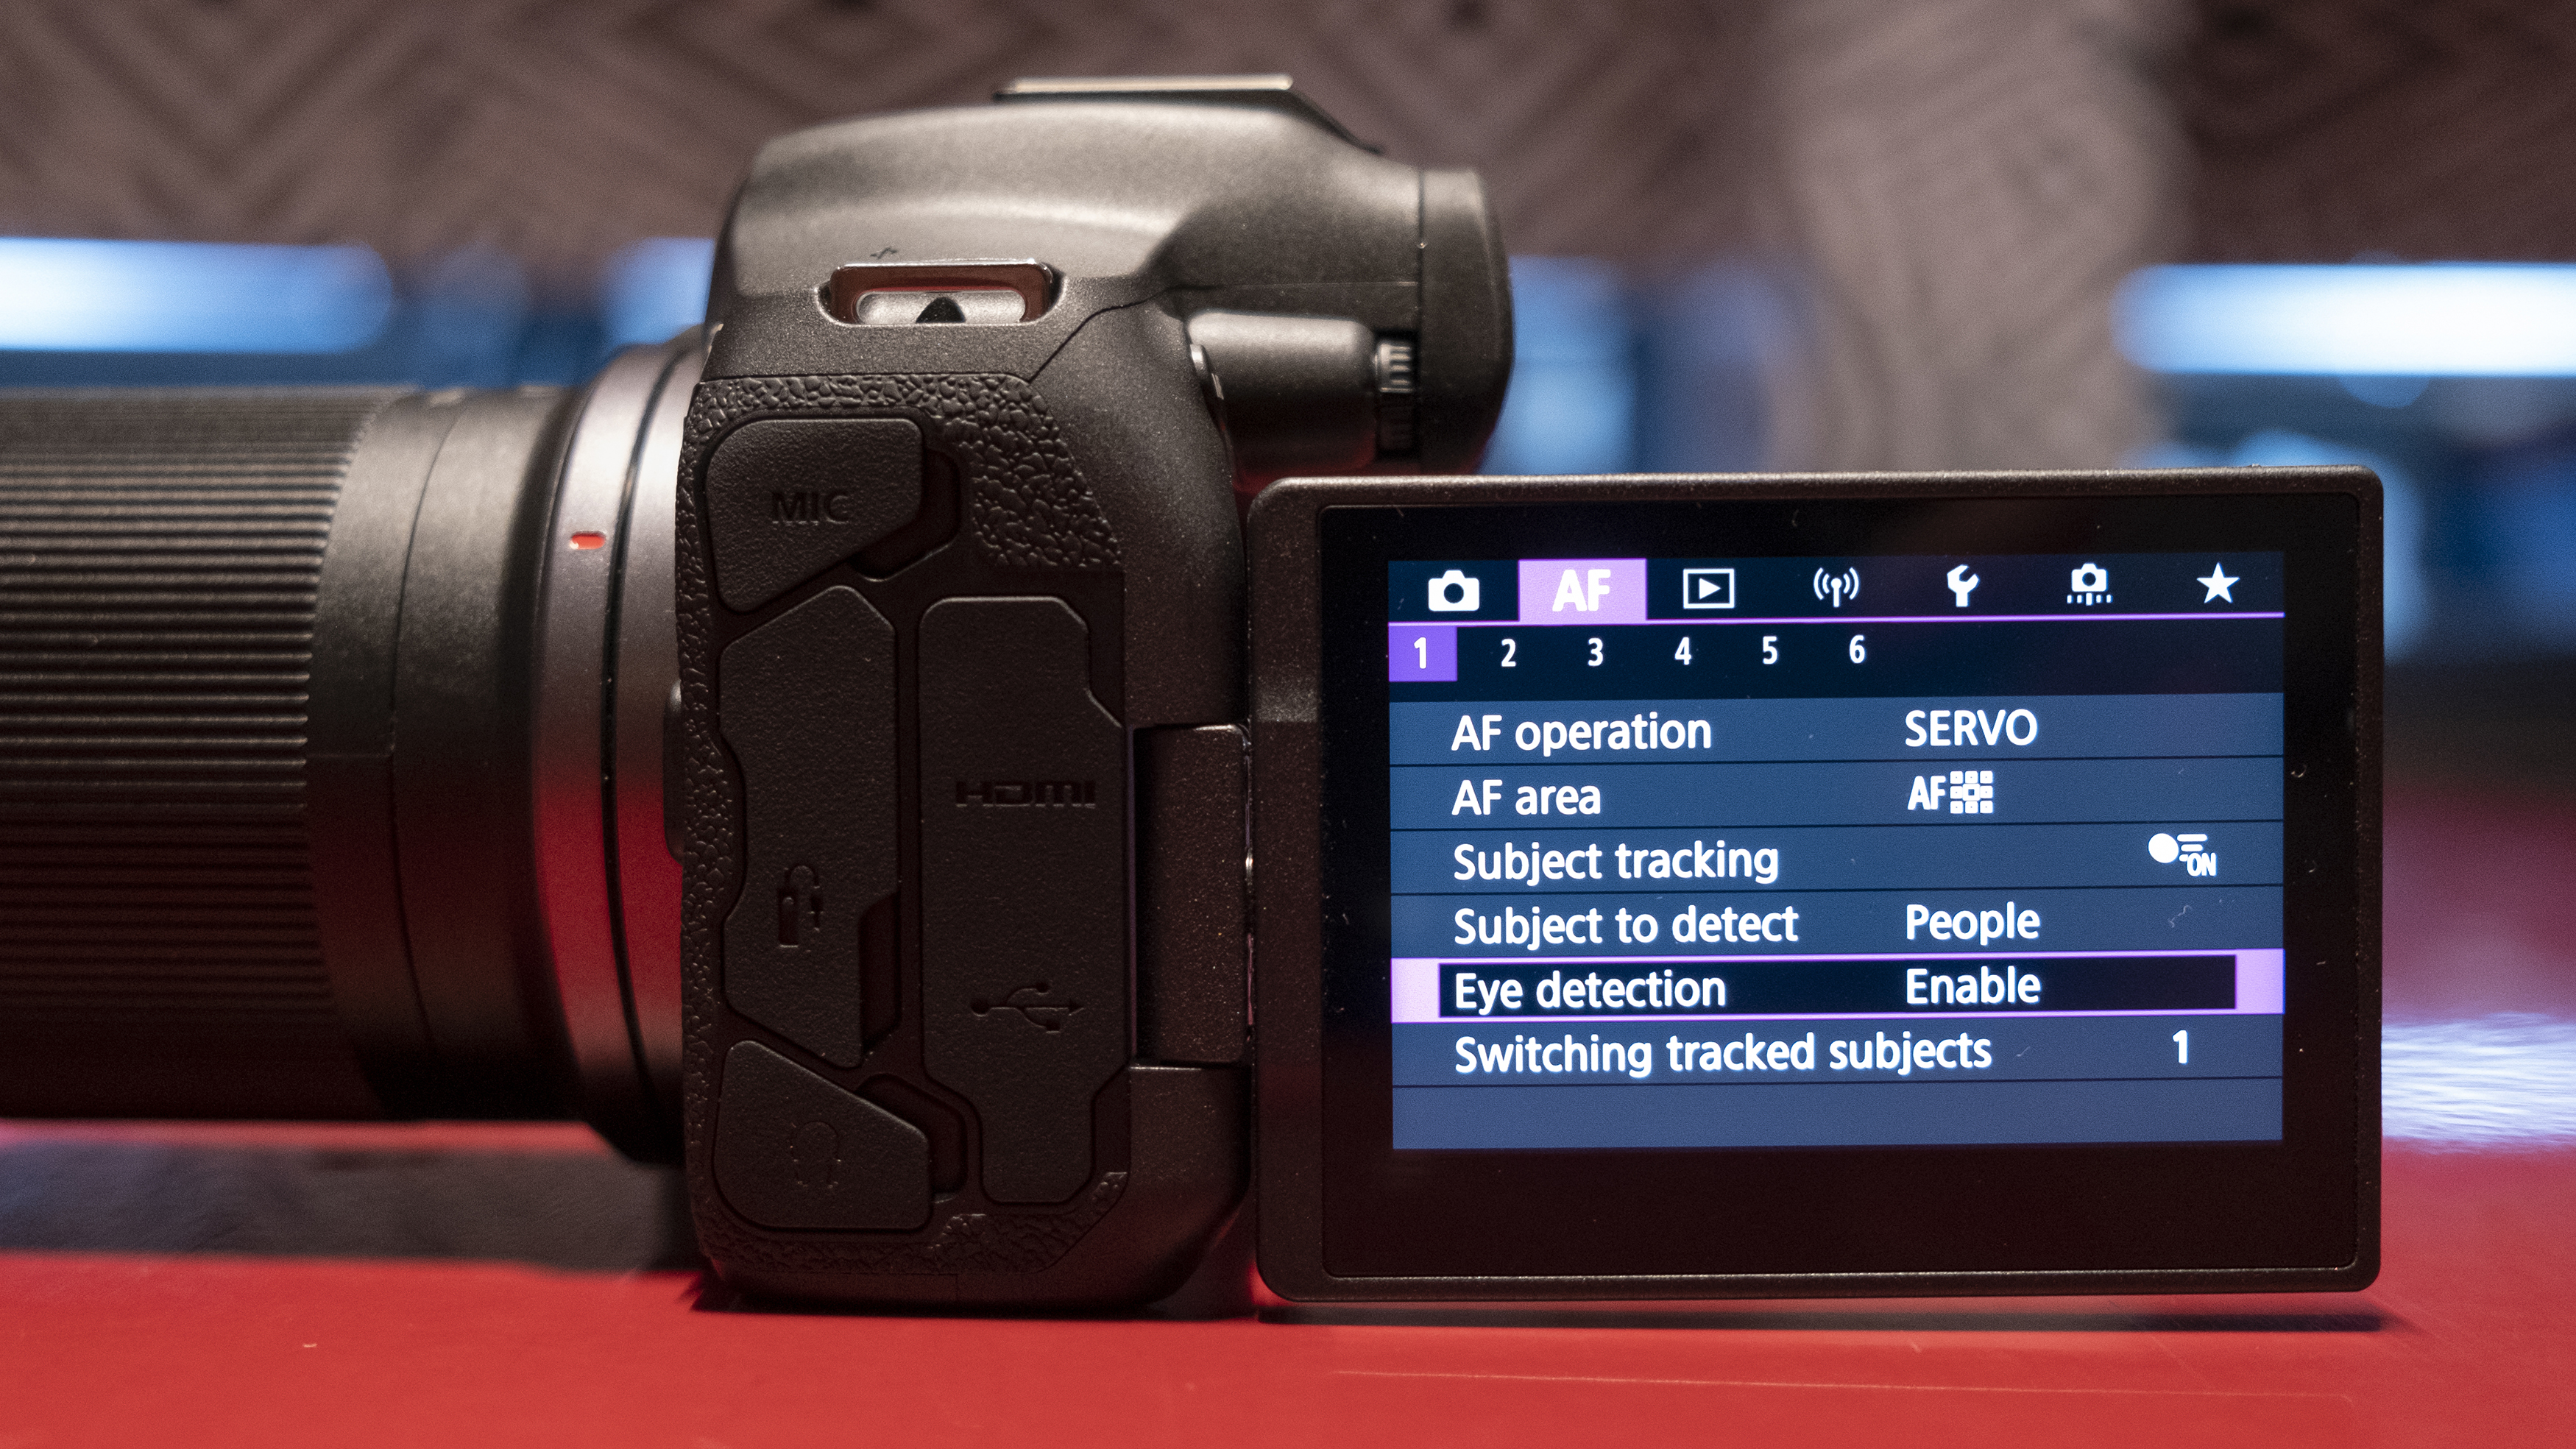 The side-flipping screen of the Canon EOS R7 camera